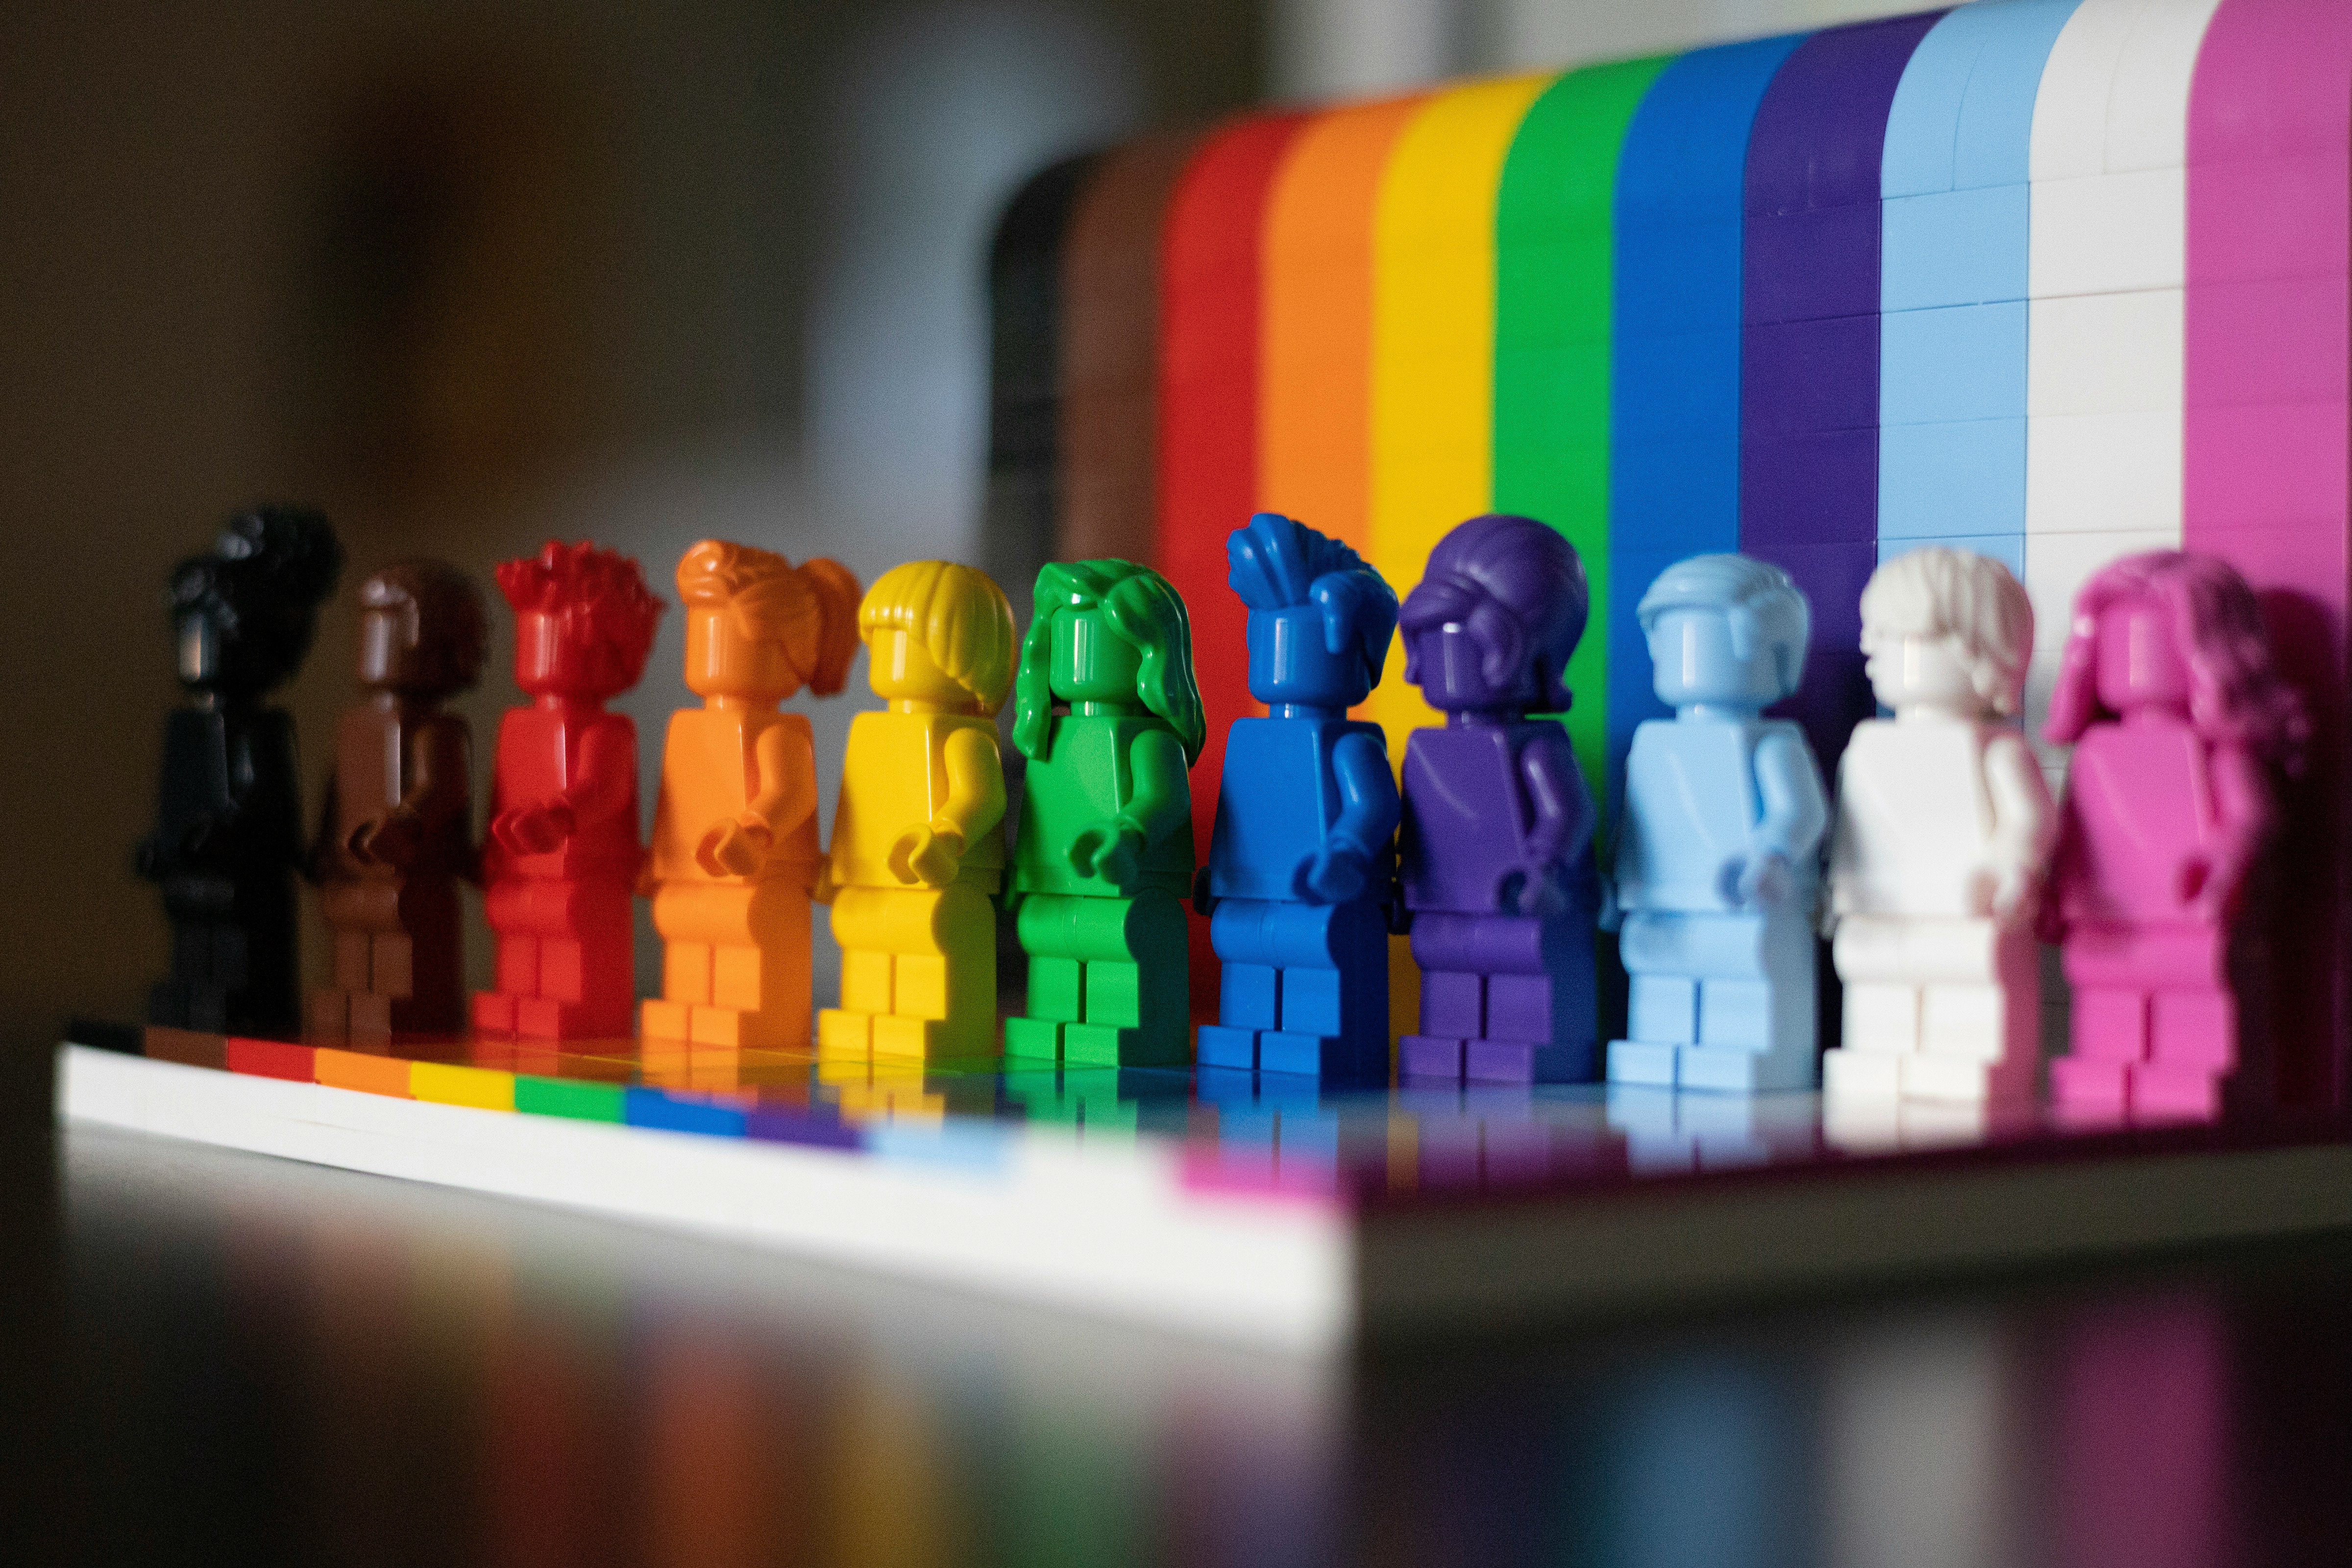 Colourful lego people representing the LGBT+ community